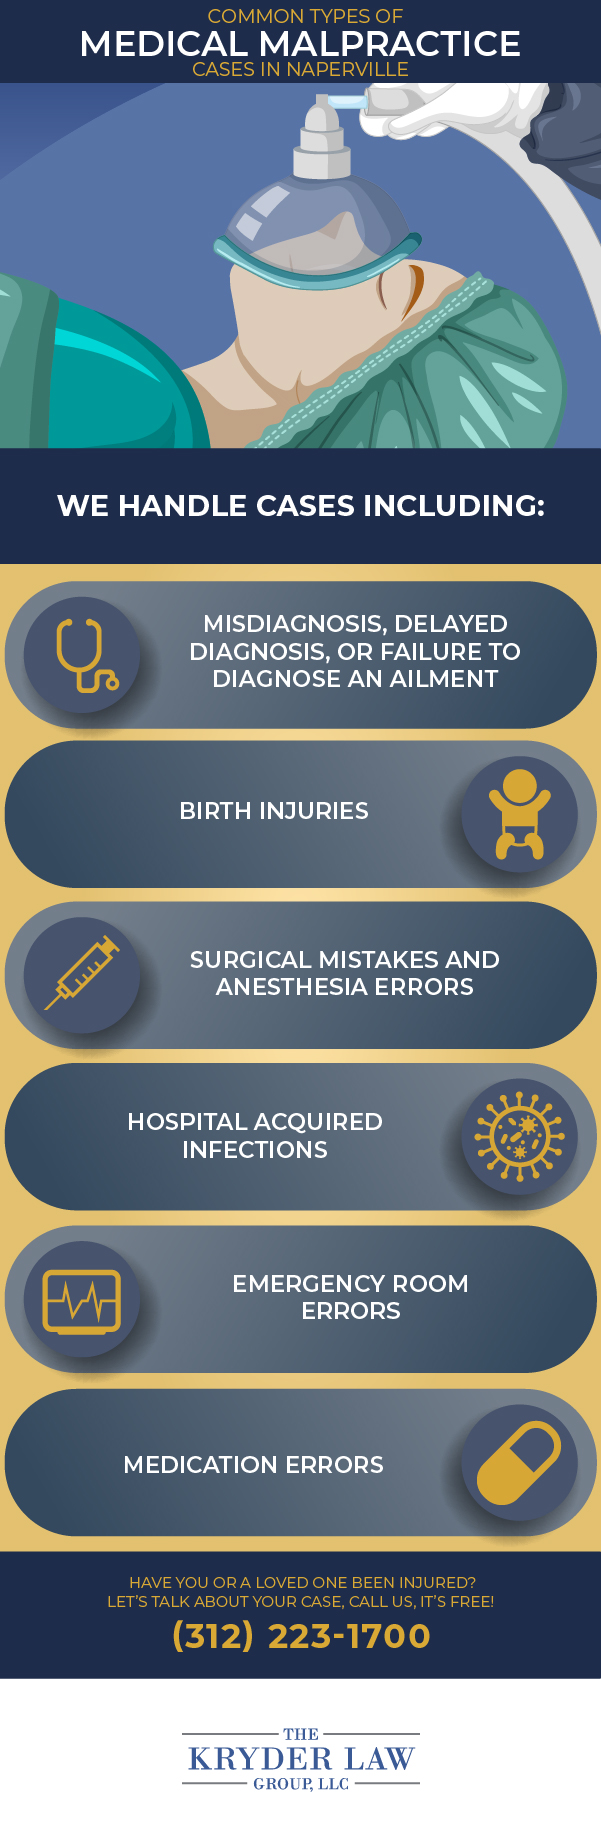 Common Types of Medical Malpractice Cases in Naperville